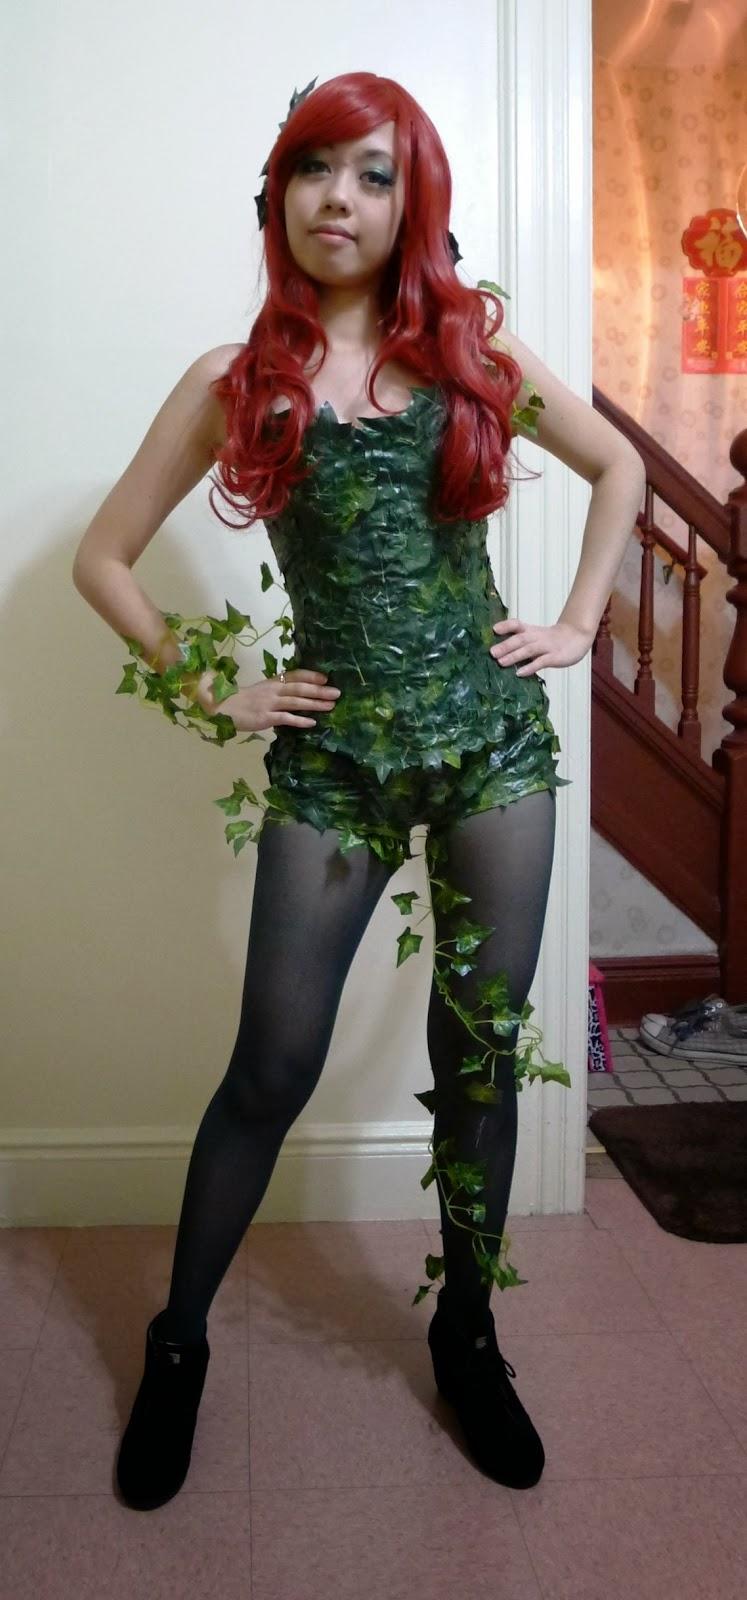 50+ Hot Pictures Of Poison Ivy – One Of The Most Beautiful Batman’s Villain 11